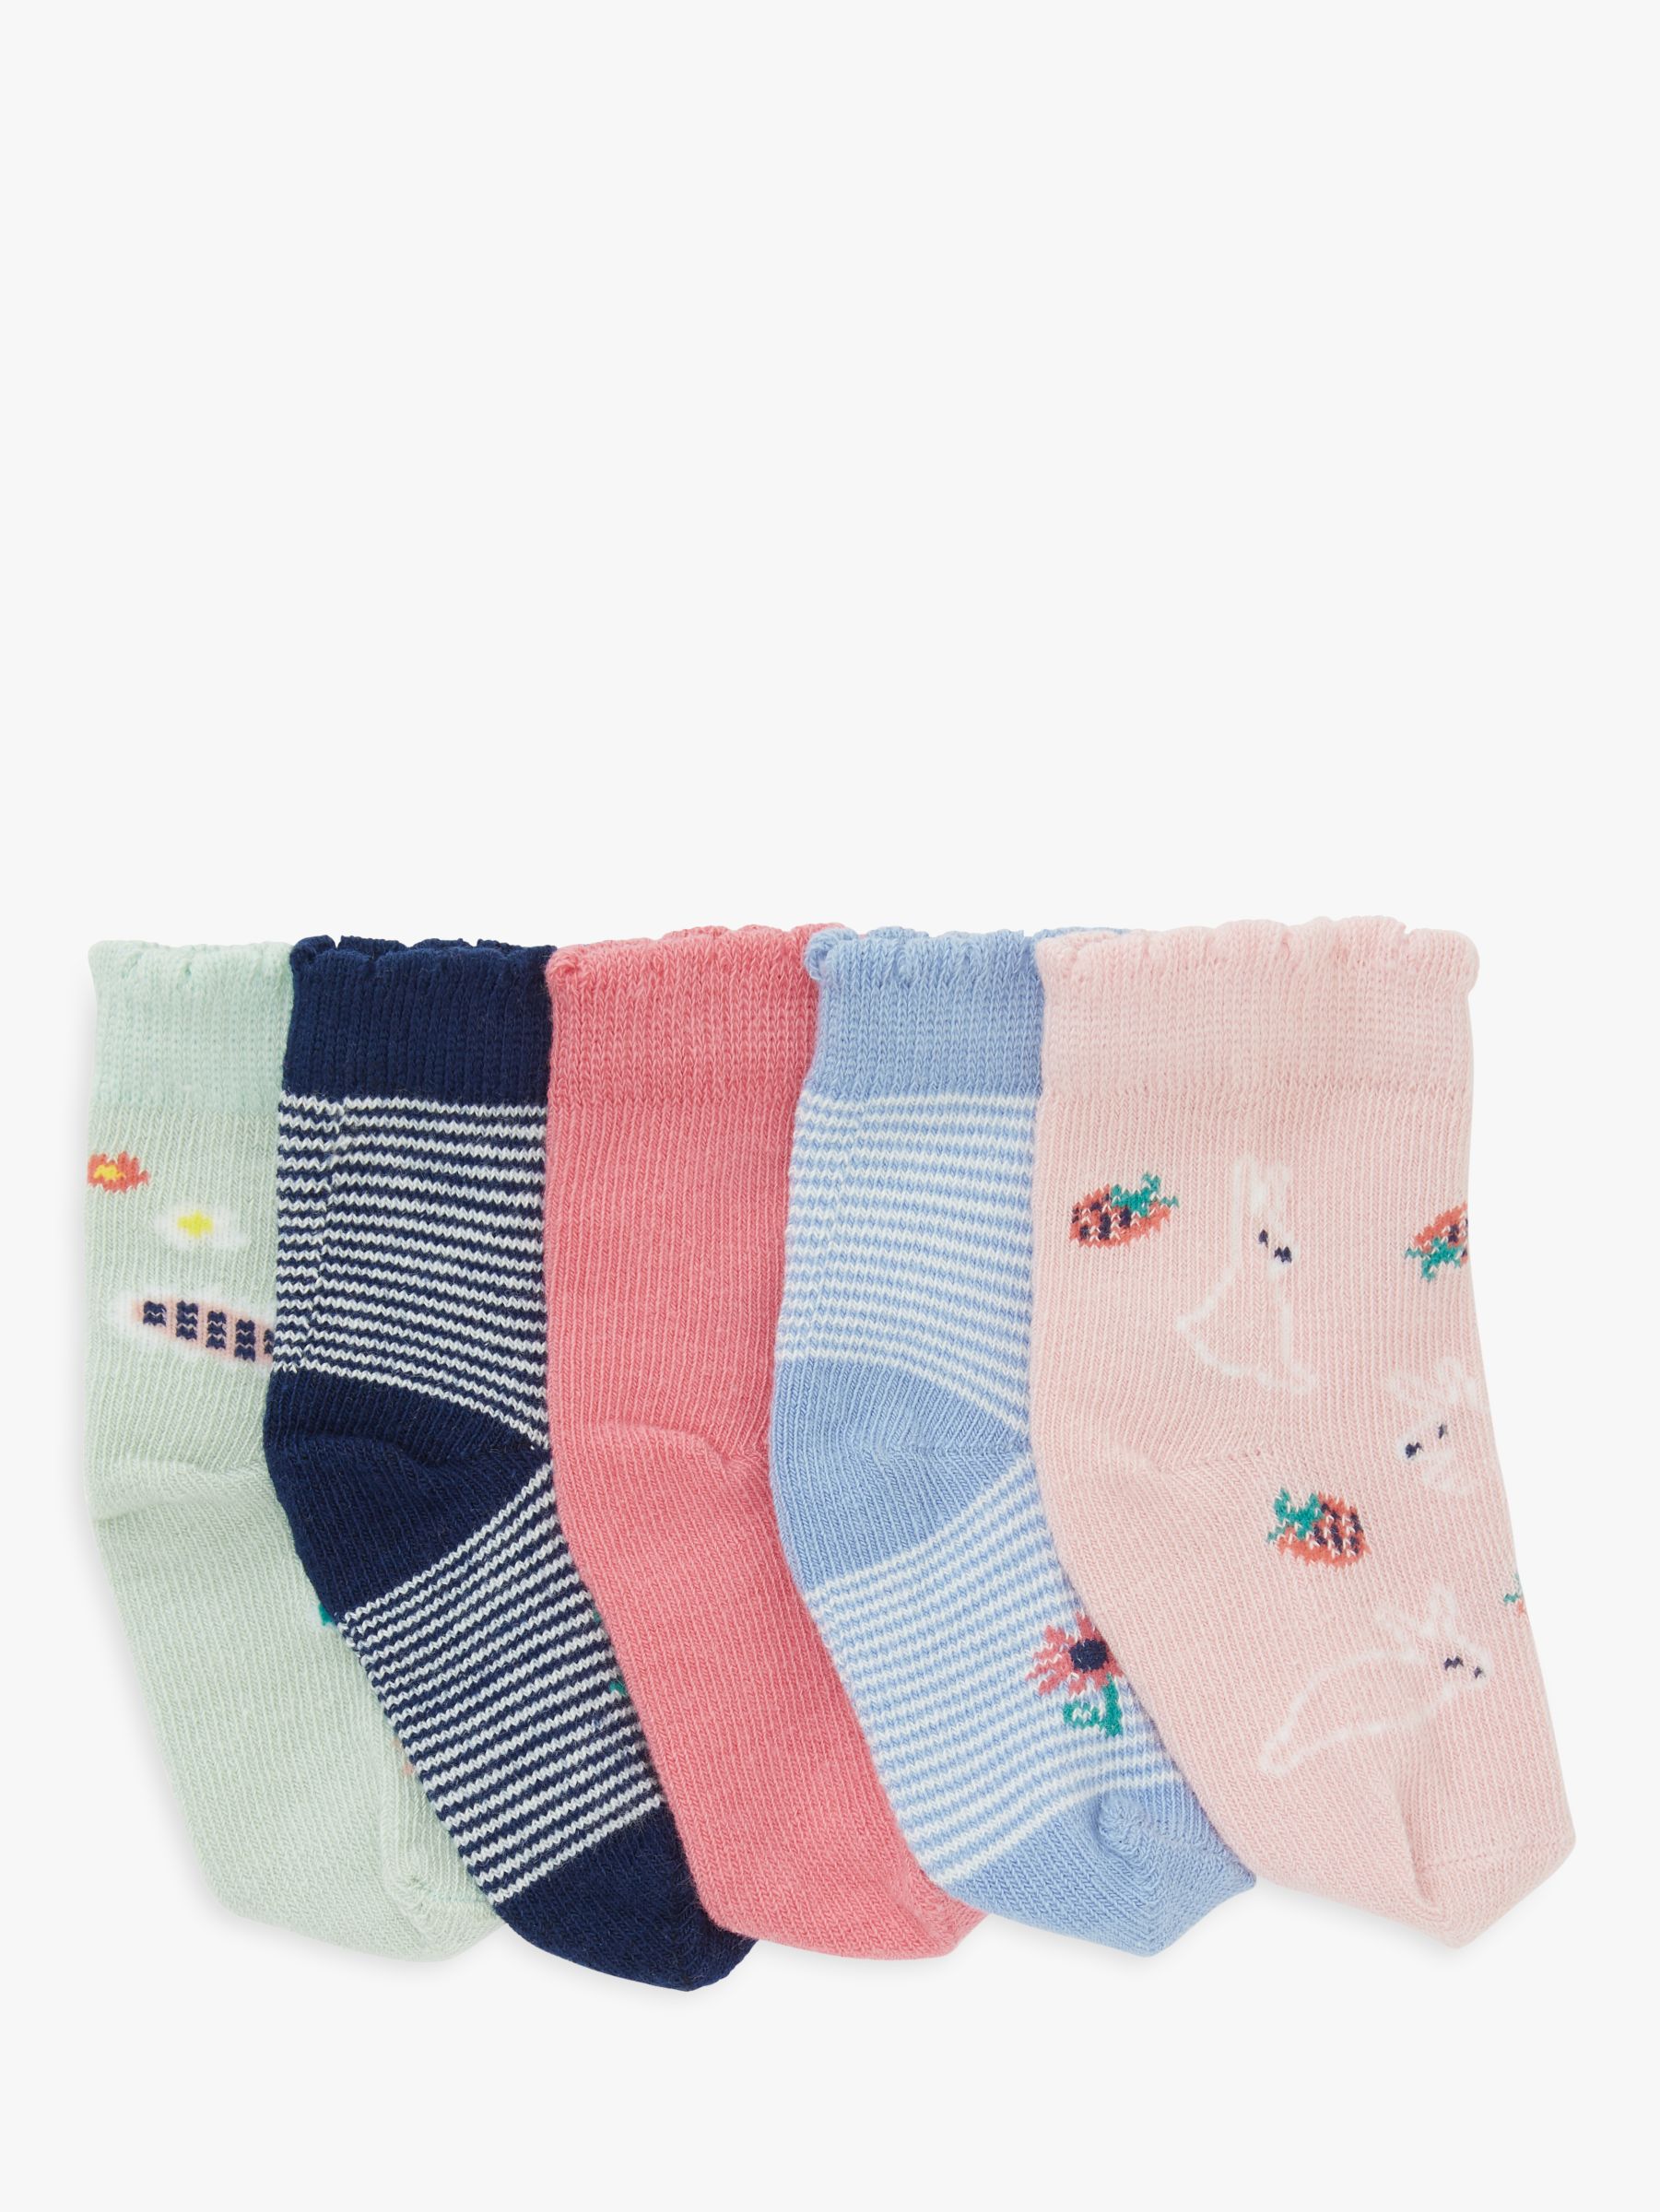 John Lewis & Partners Baby Cotton Rich Bunny Socks, Pack of 5, Multi, 12-18 months